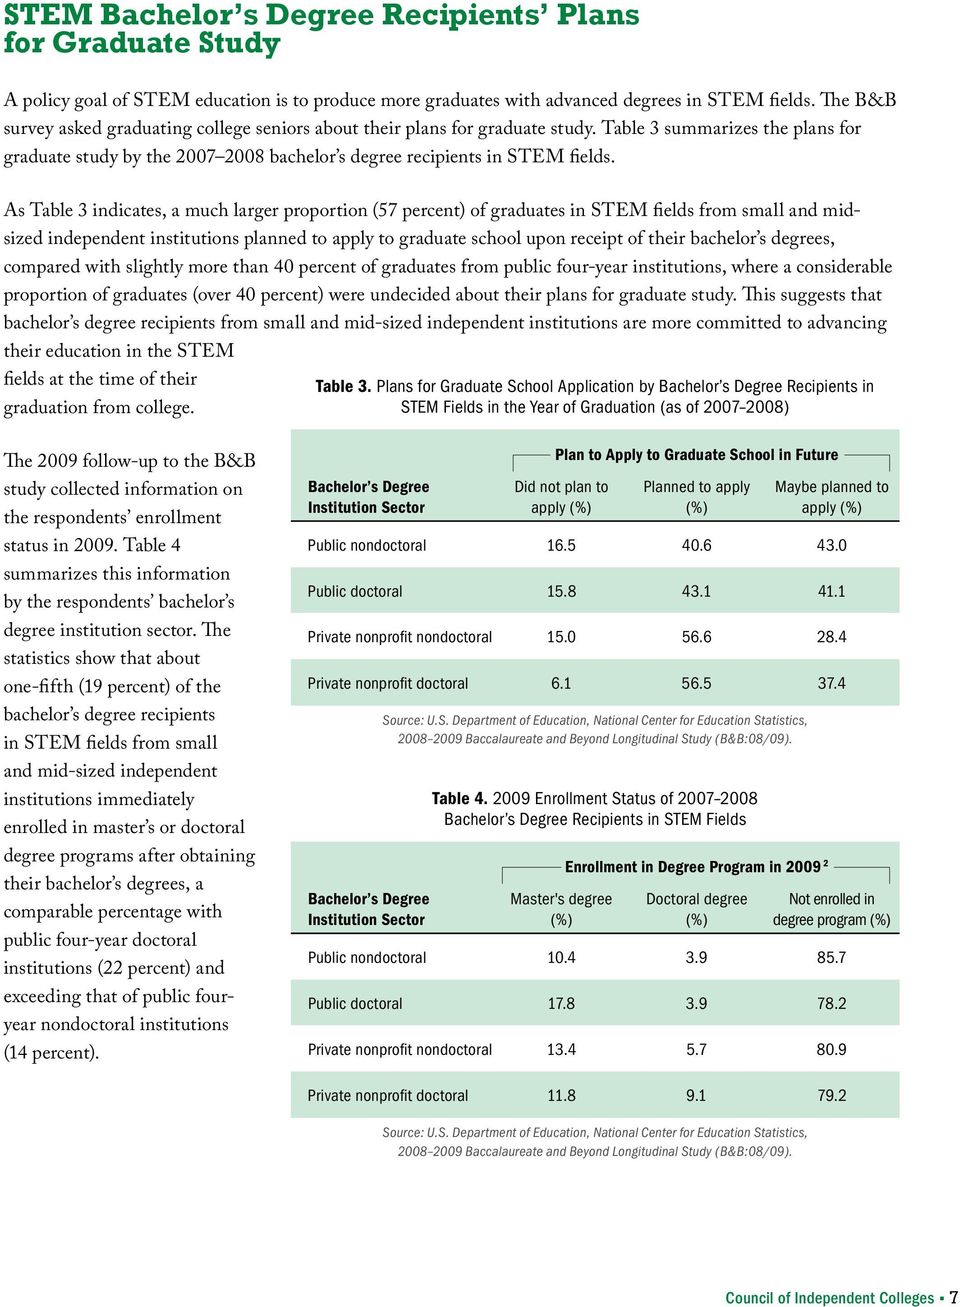 As Table 3 indicates, a much larger proportion (57 percent) of graduates in STEM fields from small and midsized independent institutions planned to apply to graduate school upon receipt of their